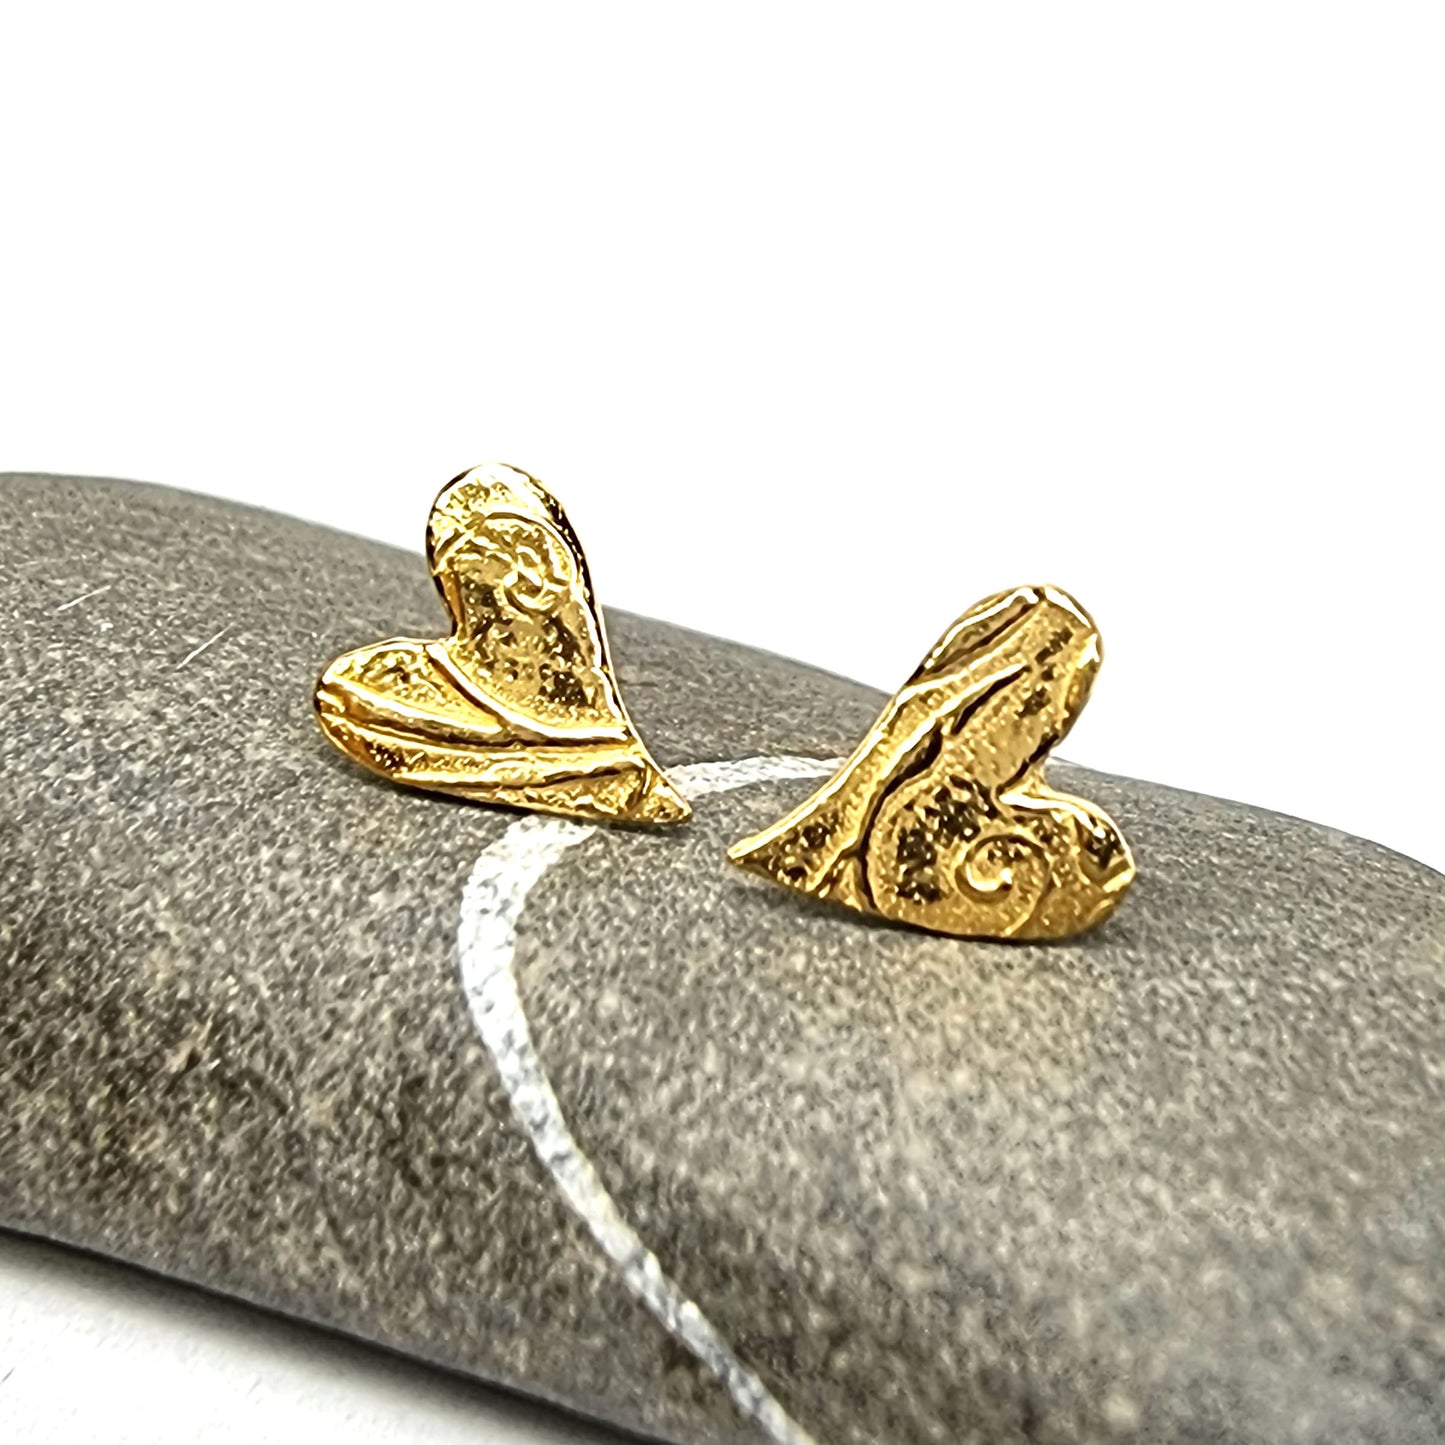 Yellow gold vermeil asymmetrical heart stud earrings with a swirl pattern. Pictured on a pebble.